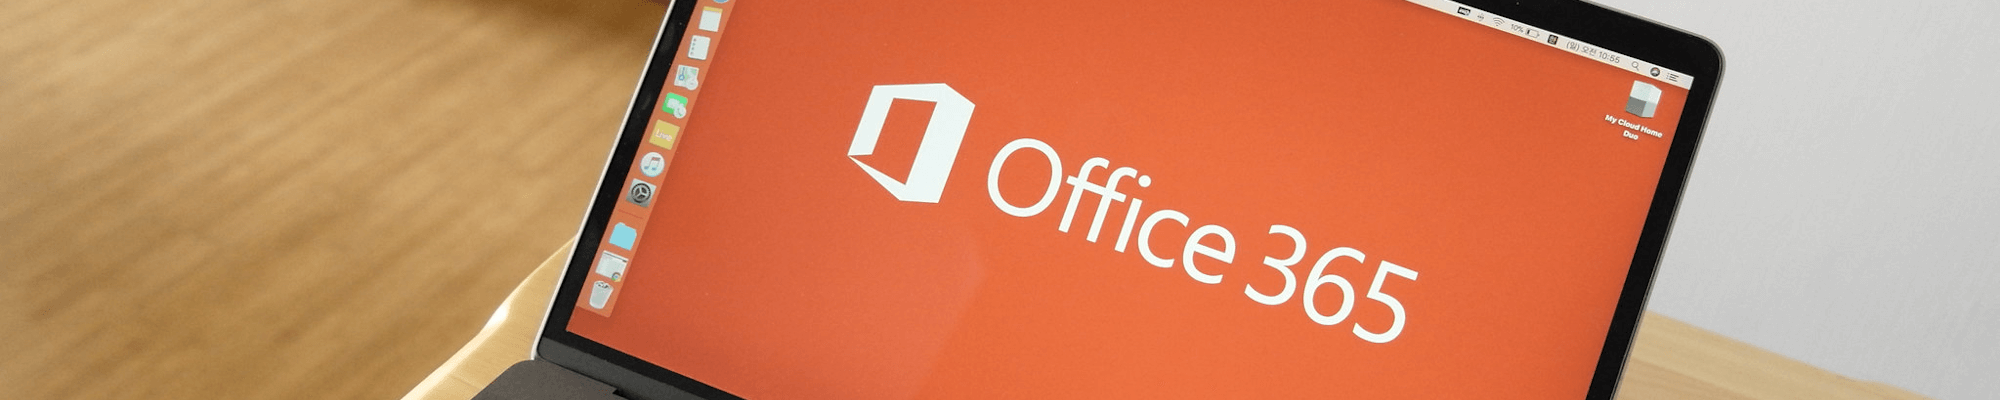 Messagerie Office 365